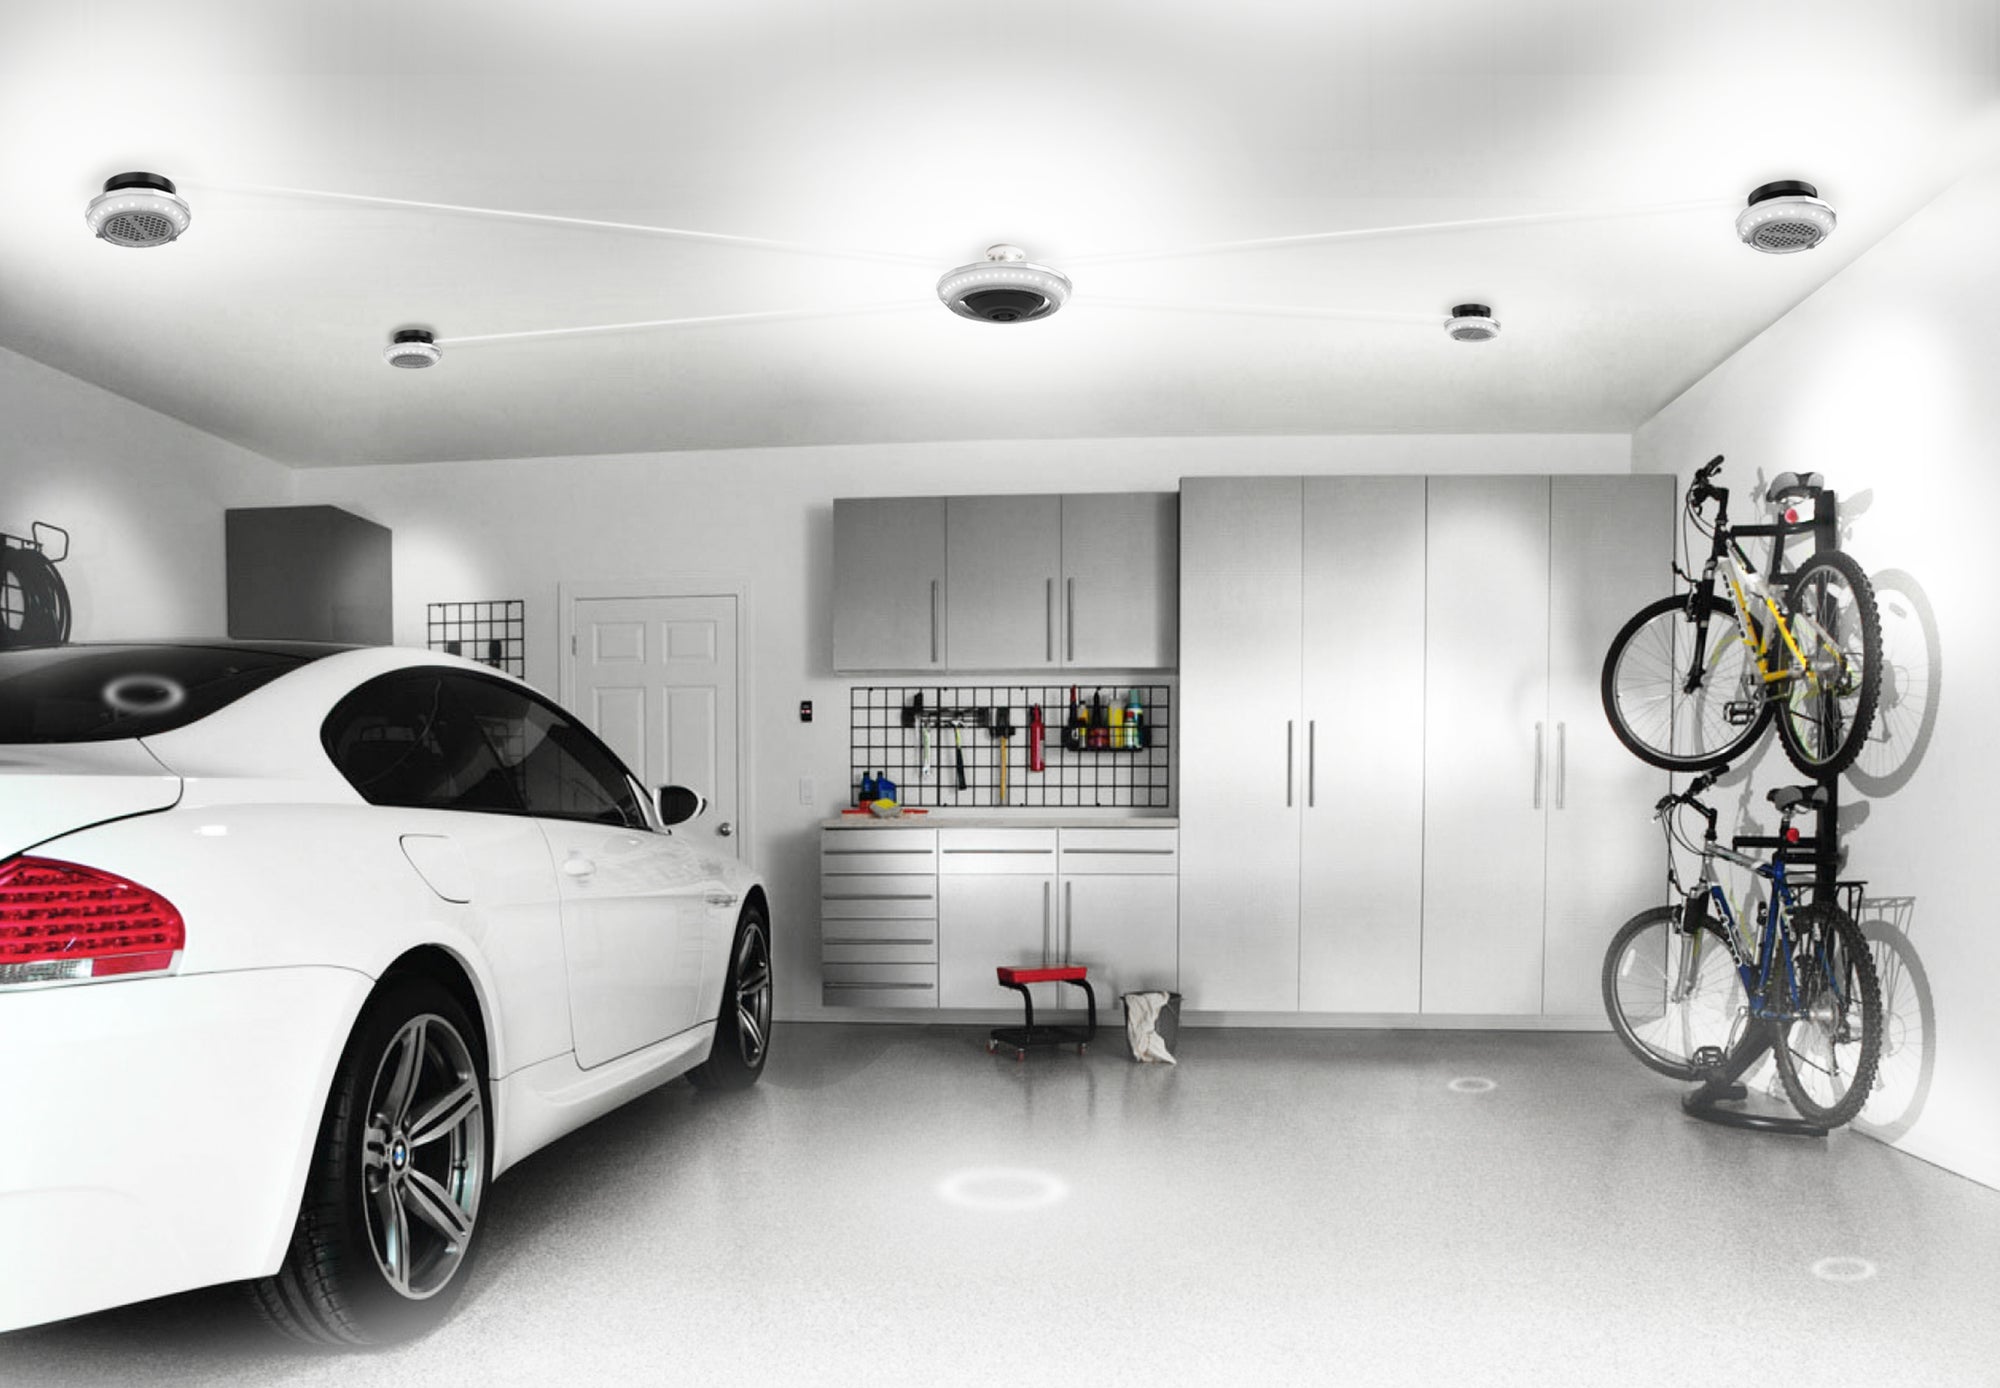 Very well lit 2 car garage with a white sports car parked on the left side. Full room lighting provided by an MPI system from STKR Concepts.